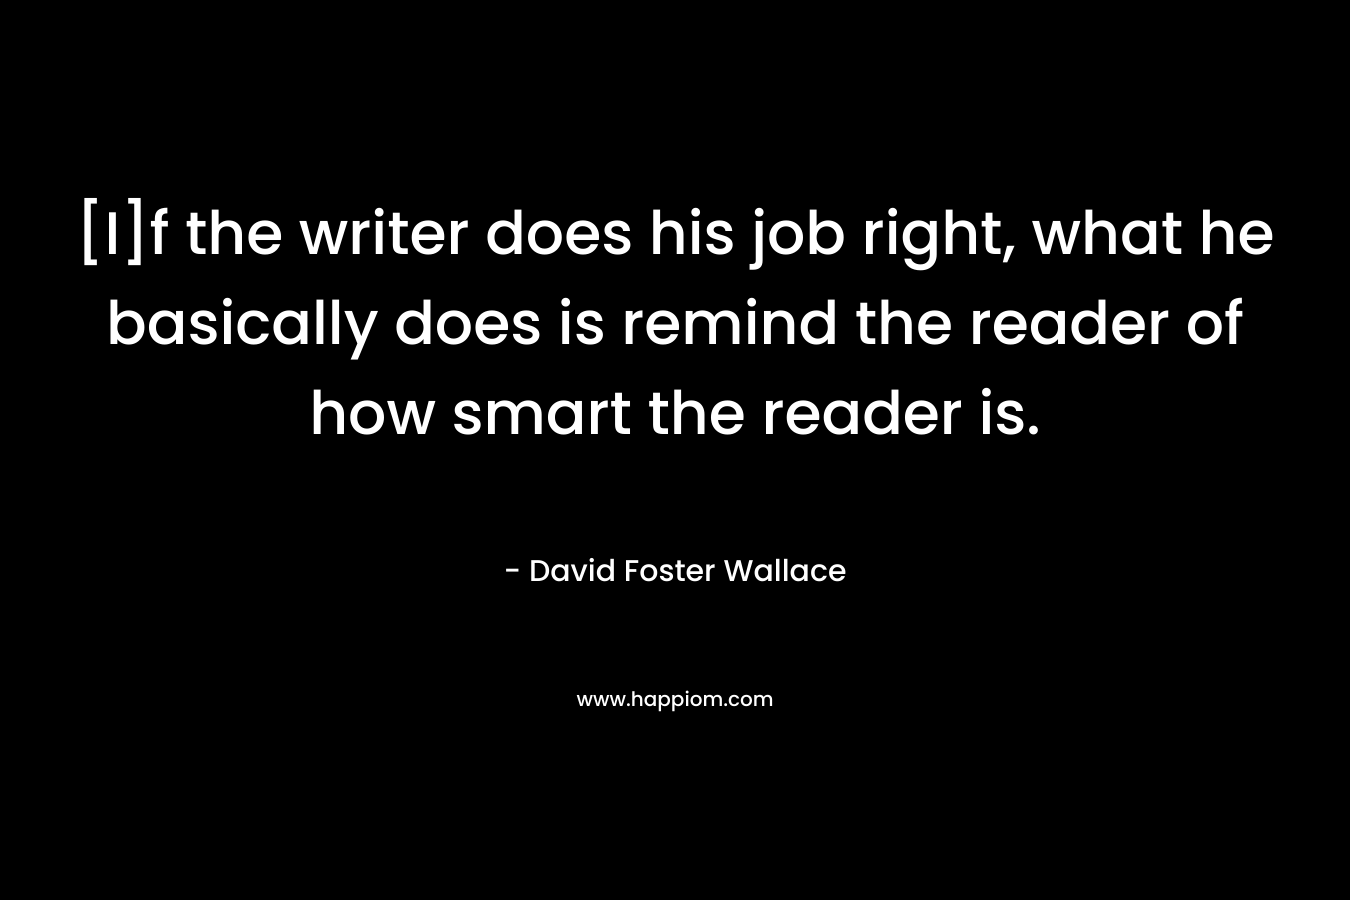 [I]f the writer does his job right, what he basically does is remind the reader of how smart the reader is.